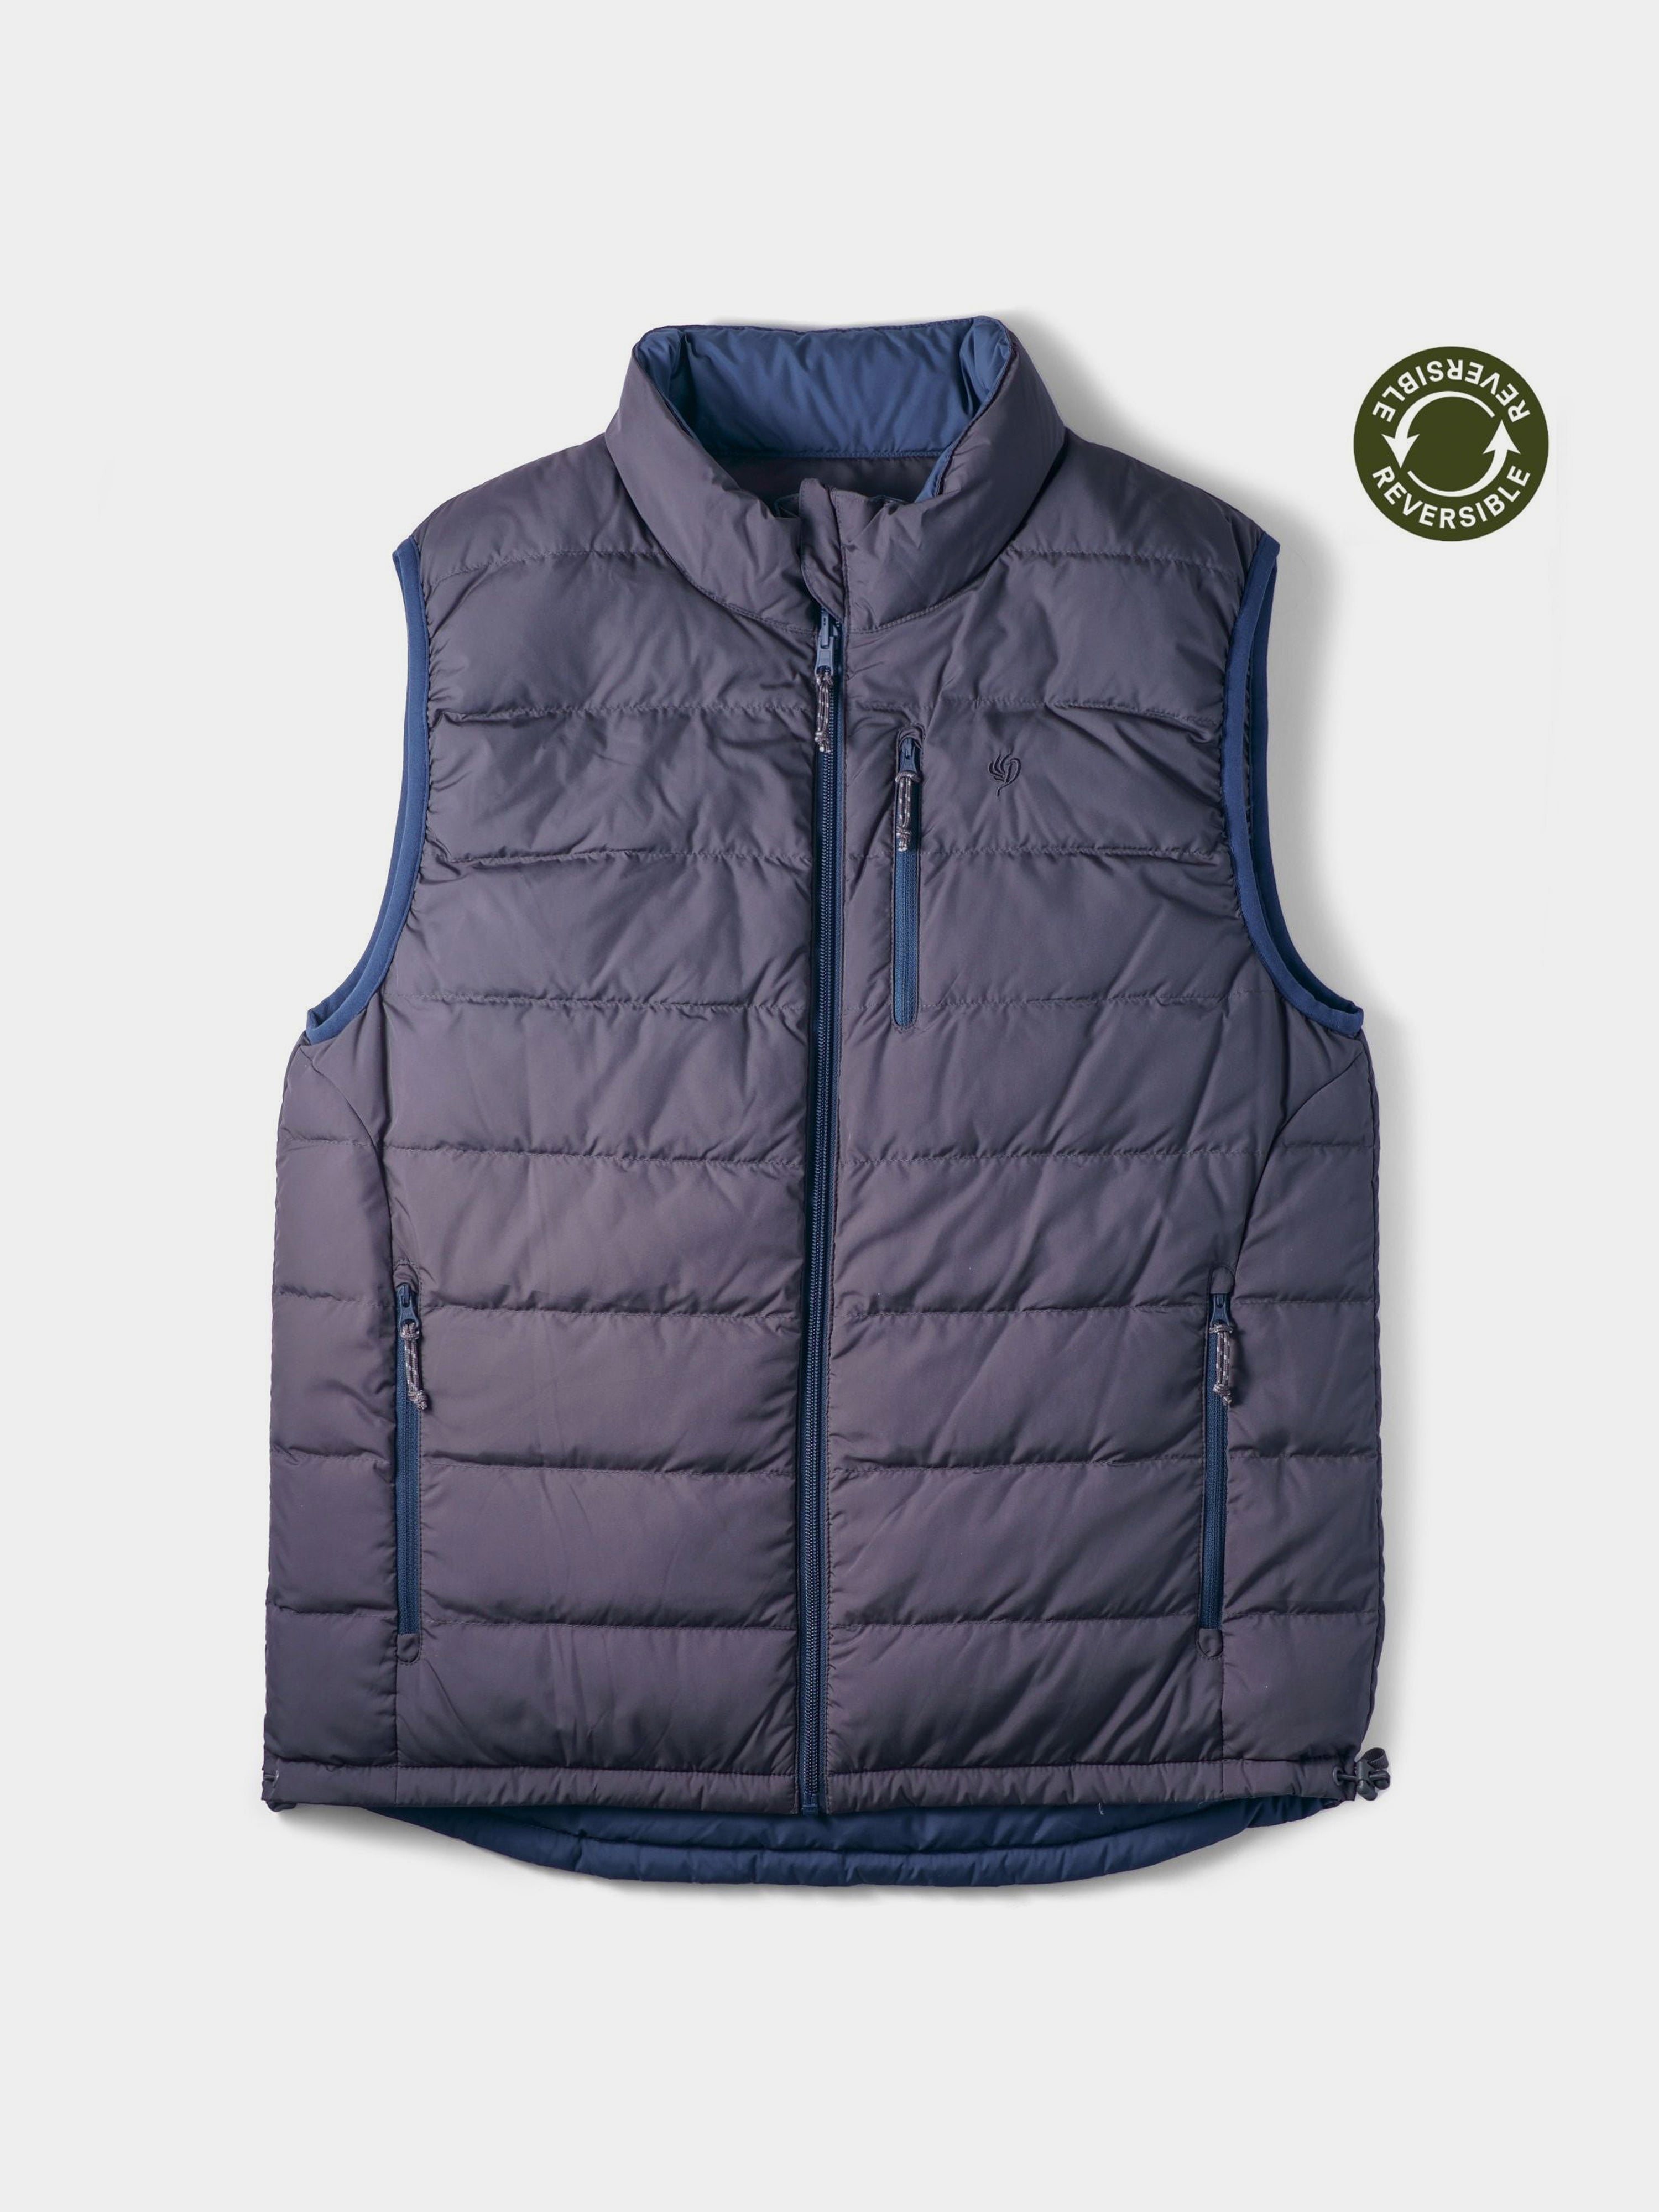 DryDown Reversible Vest - Faded Navy/Charcoal – Duck Camp